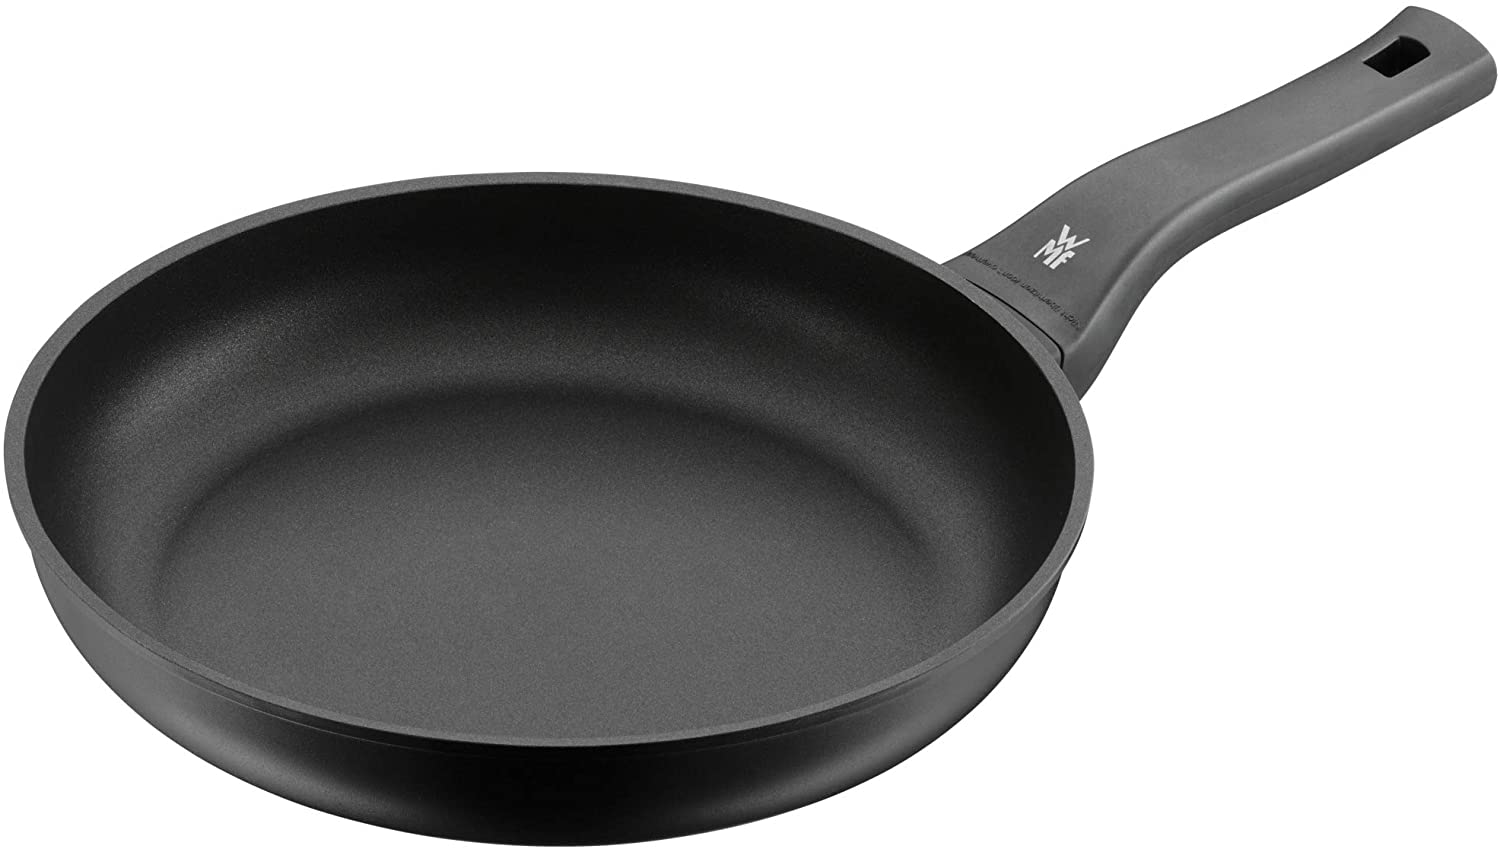 WMF PermaDur Excellent Induction Frying Pan 28 cm Aluminium Coated with Plastic Handle with Flame Retardant